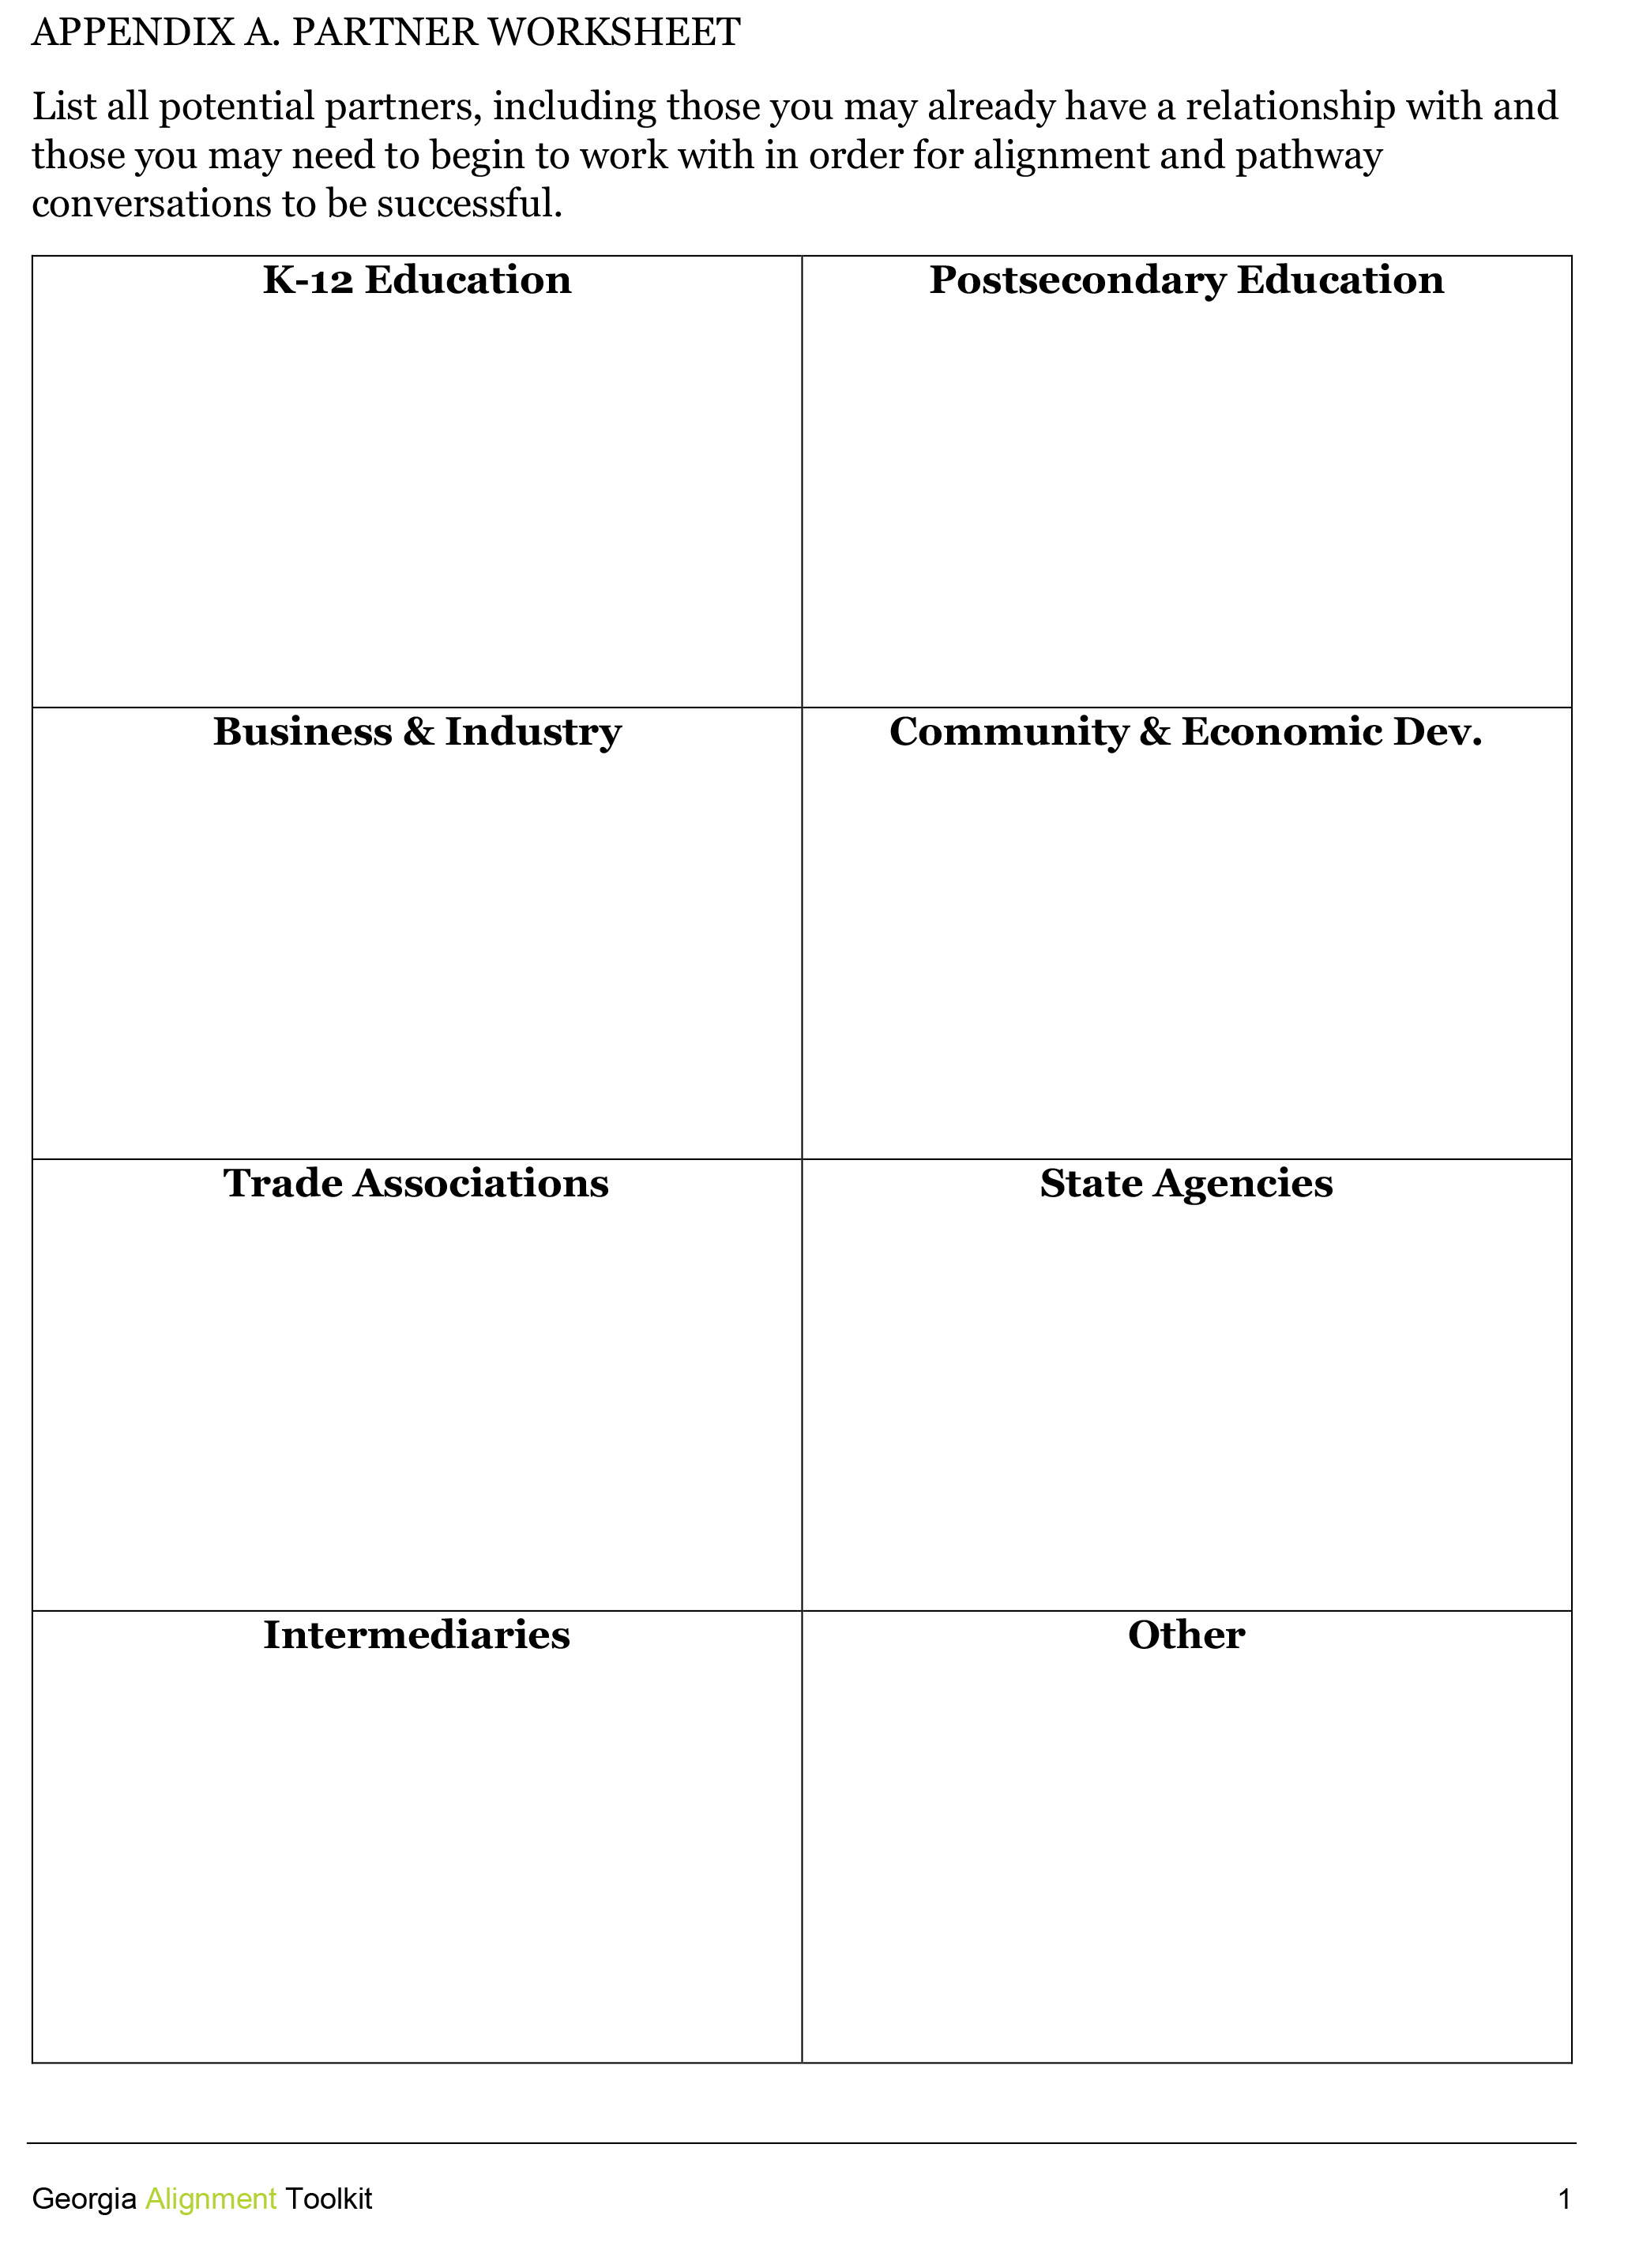 Alignment Toolkit Worksheets